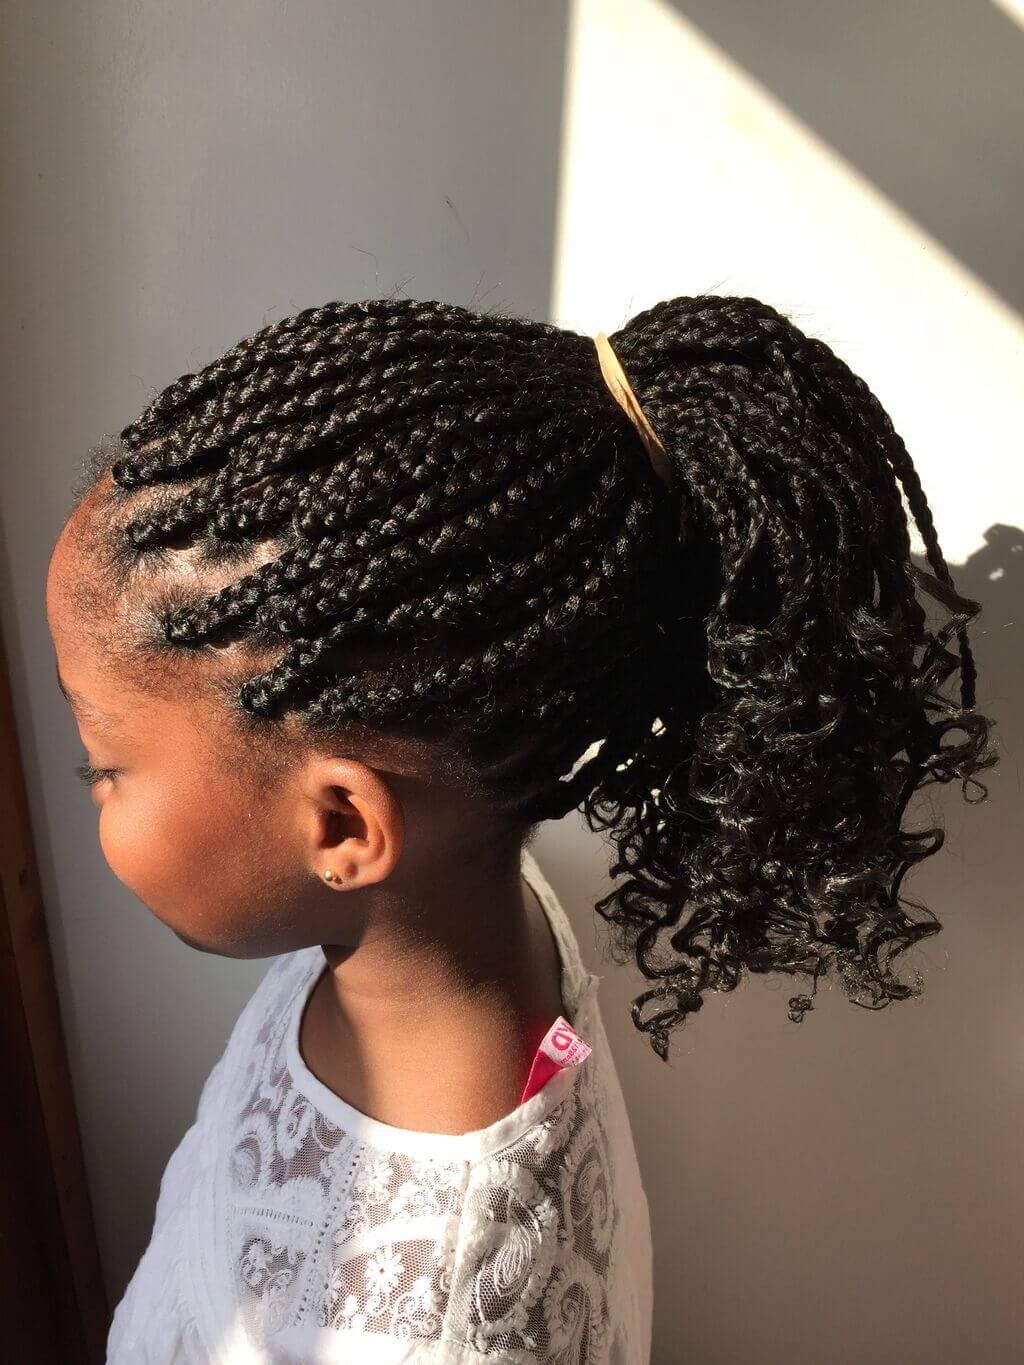 The Curled Cute Braids for Kids